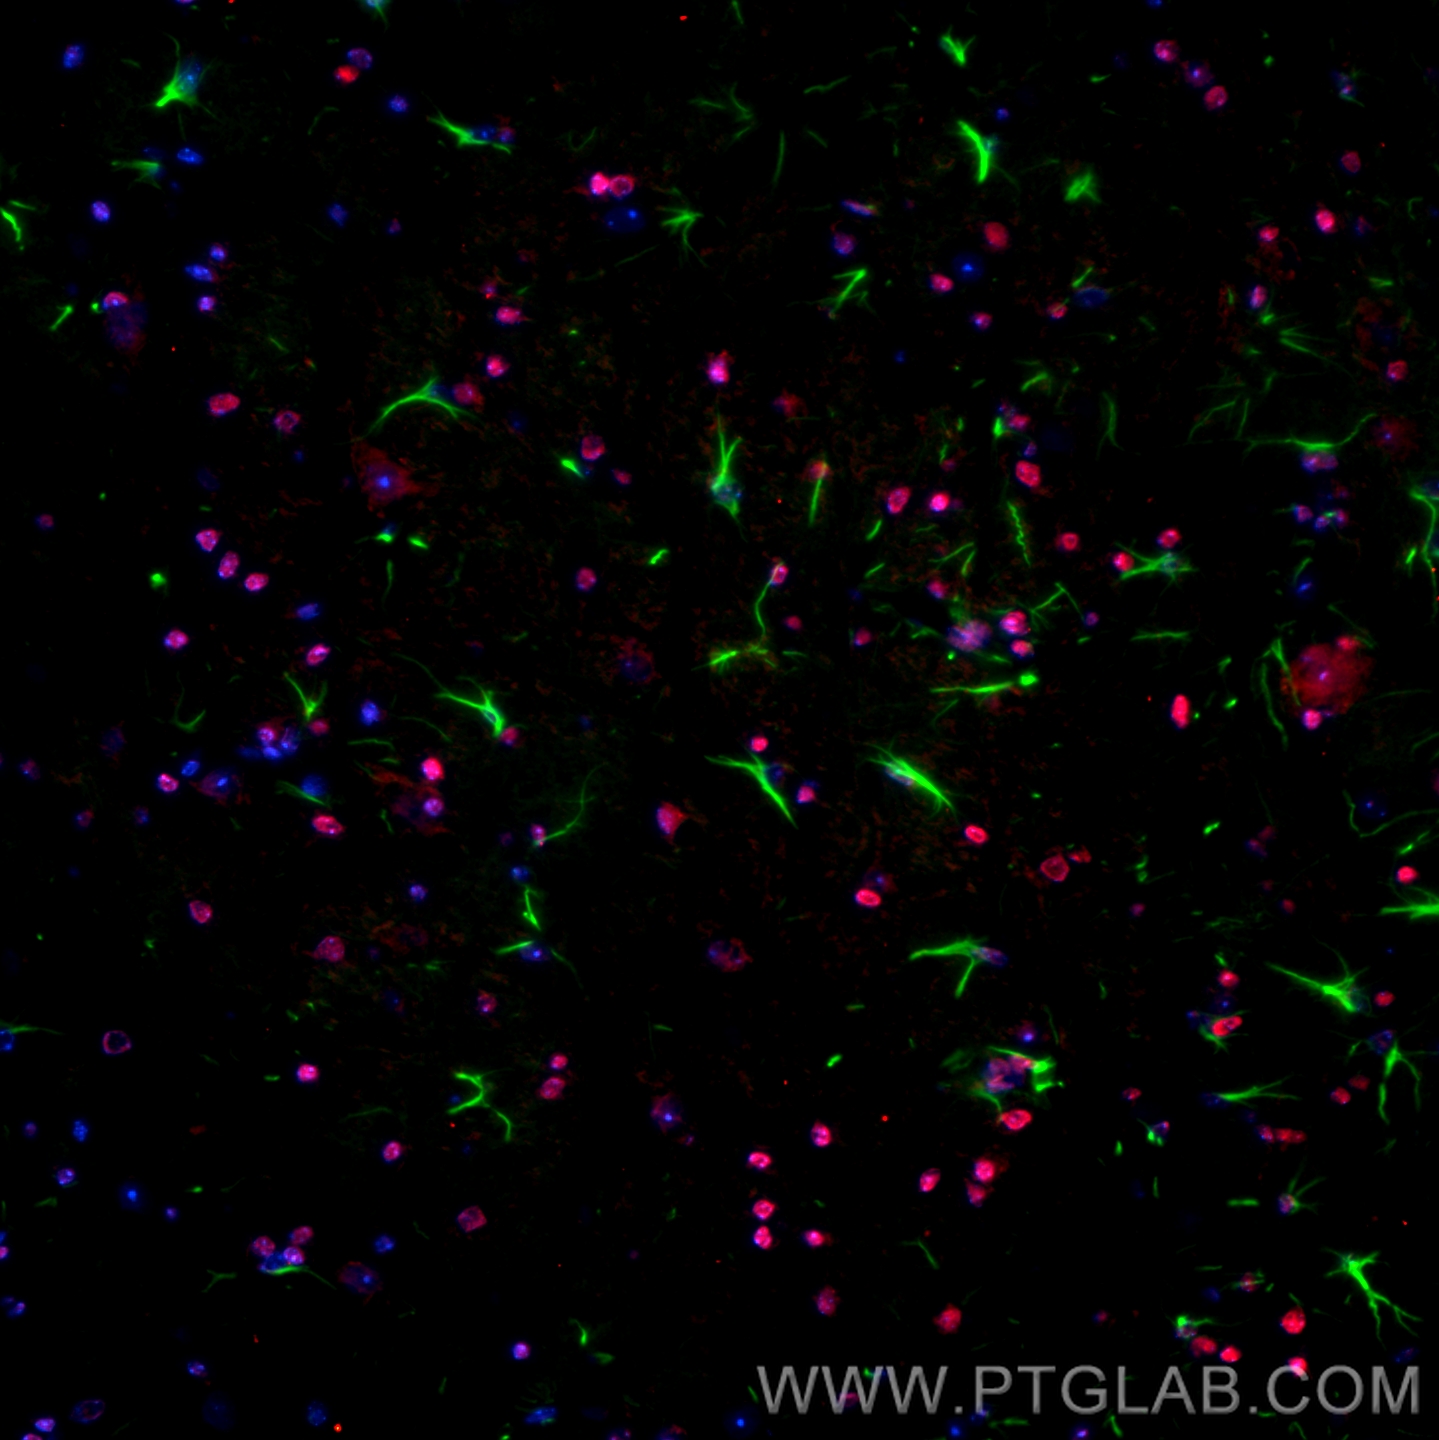 Immunofluorescence of mouse cerebellum: FFPE mouse cerebellum sections were stained with anti-GFAP antibody (60190-1-Ig) labeled with FlexAble Biotin Antibody Labeling Kit for Mouse IgG2a (KFA047) and Streptavidin-488 (green),  and anti-SOX10 antibody (66786-1-Ig) labeled with FlexAble Biotin Antibody Labeling Kit for Mouse IgG2a (KFA047) and Streptavidin-594 (red). Cell nuclei are stained with DAPI (blue).